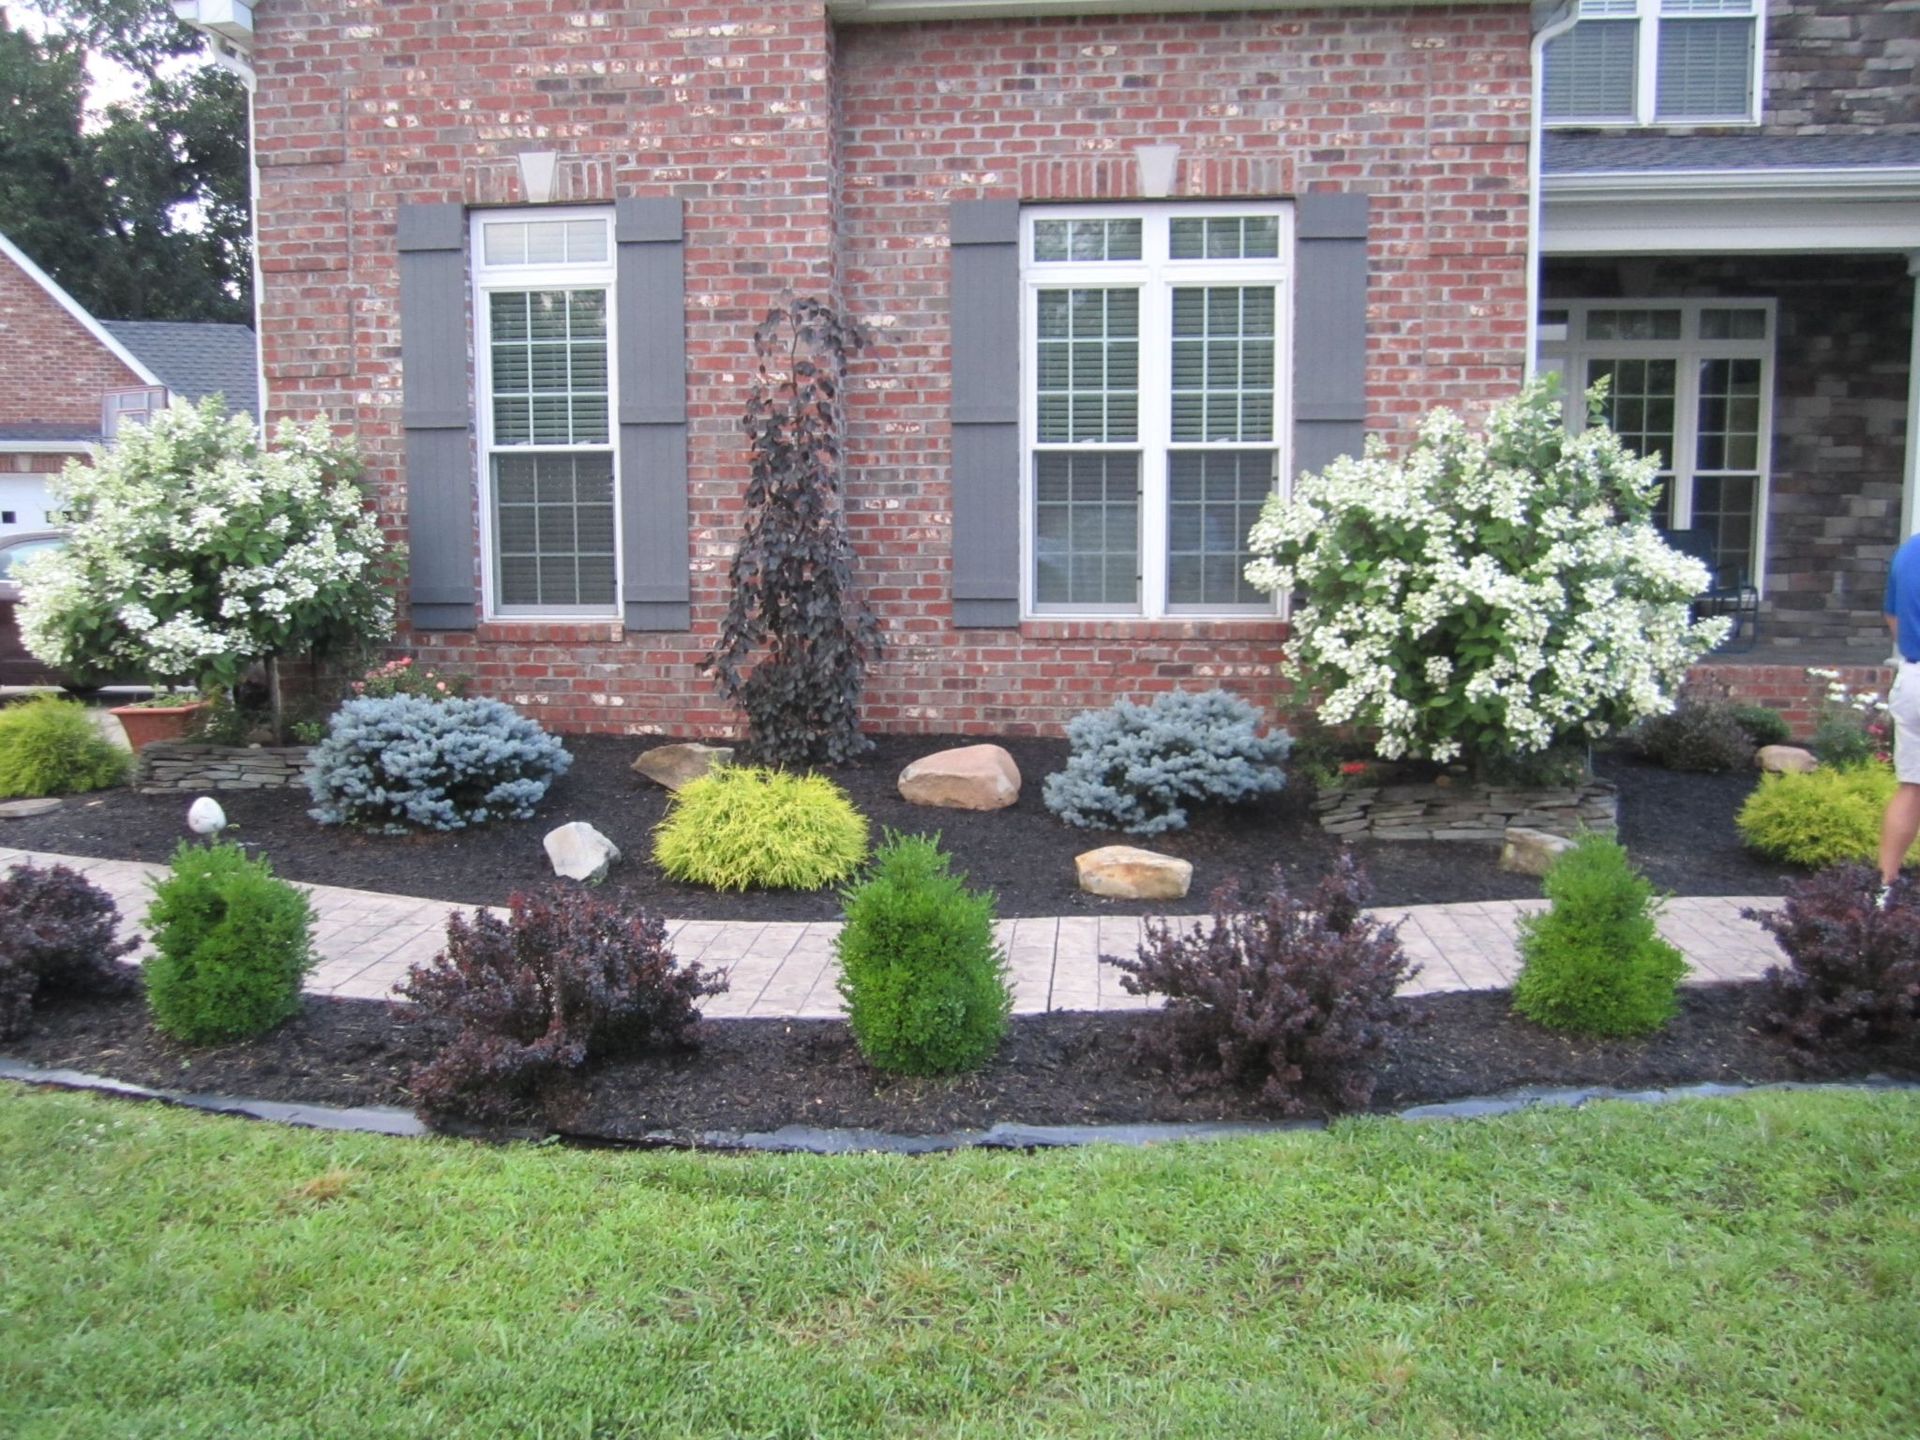 Neatly manicured garden bed in front of a brick house with various shrubs and blooming white flowers